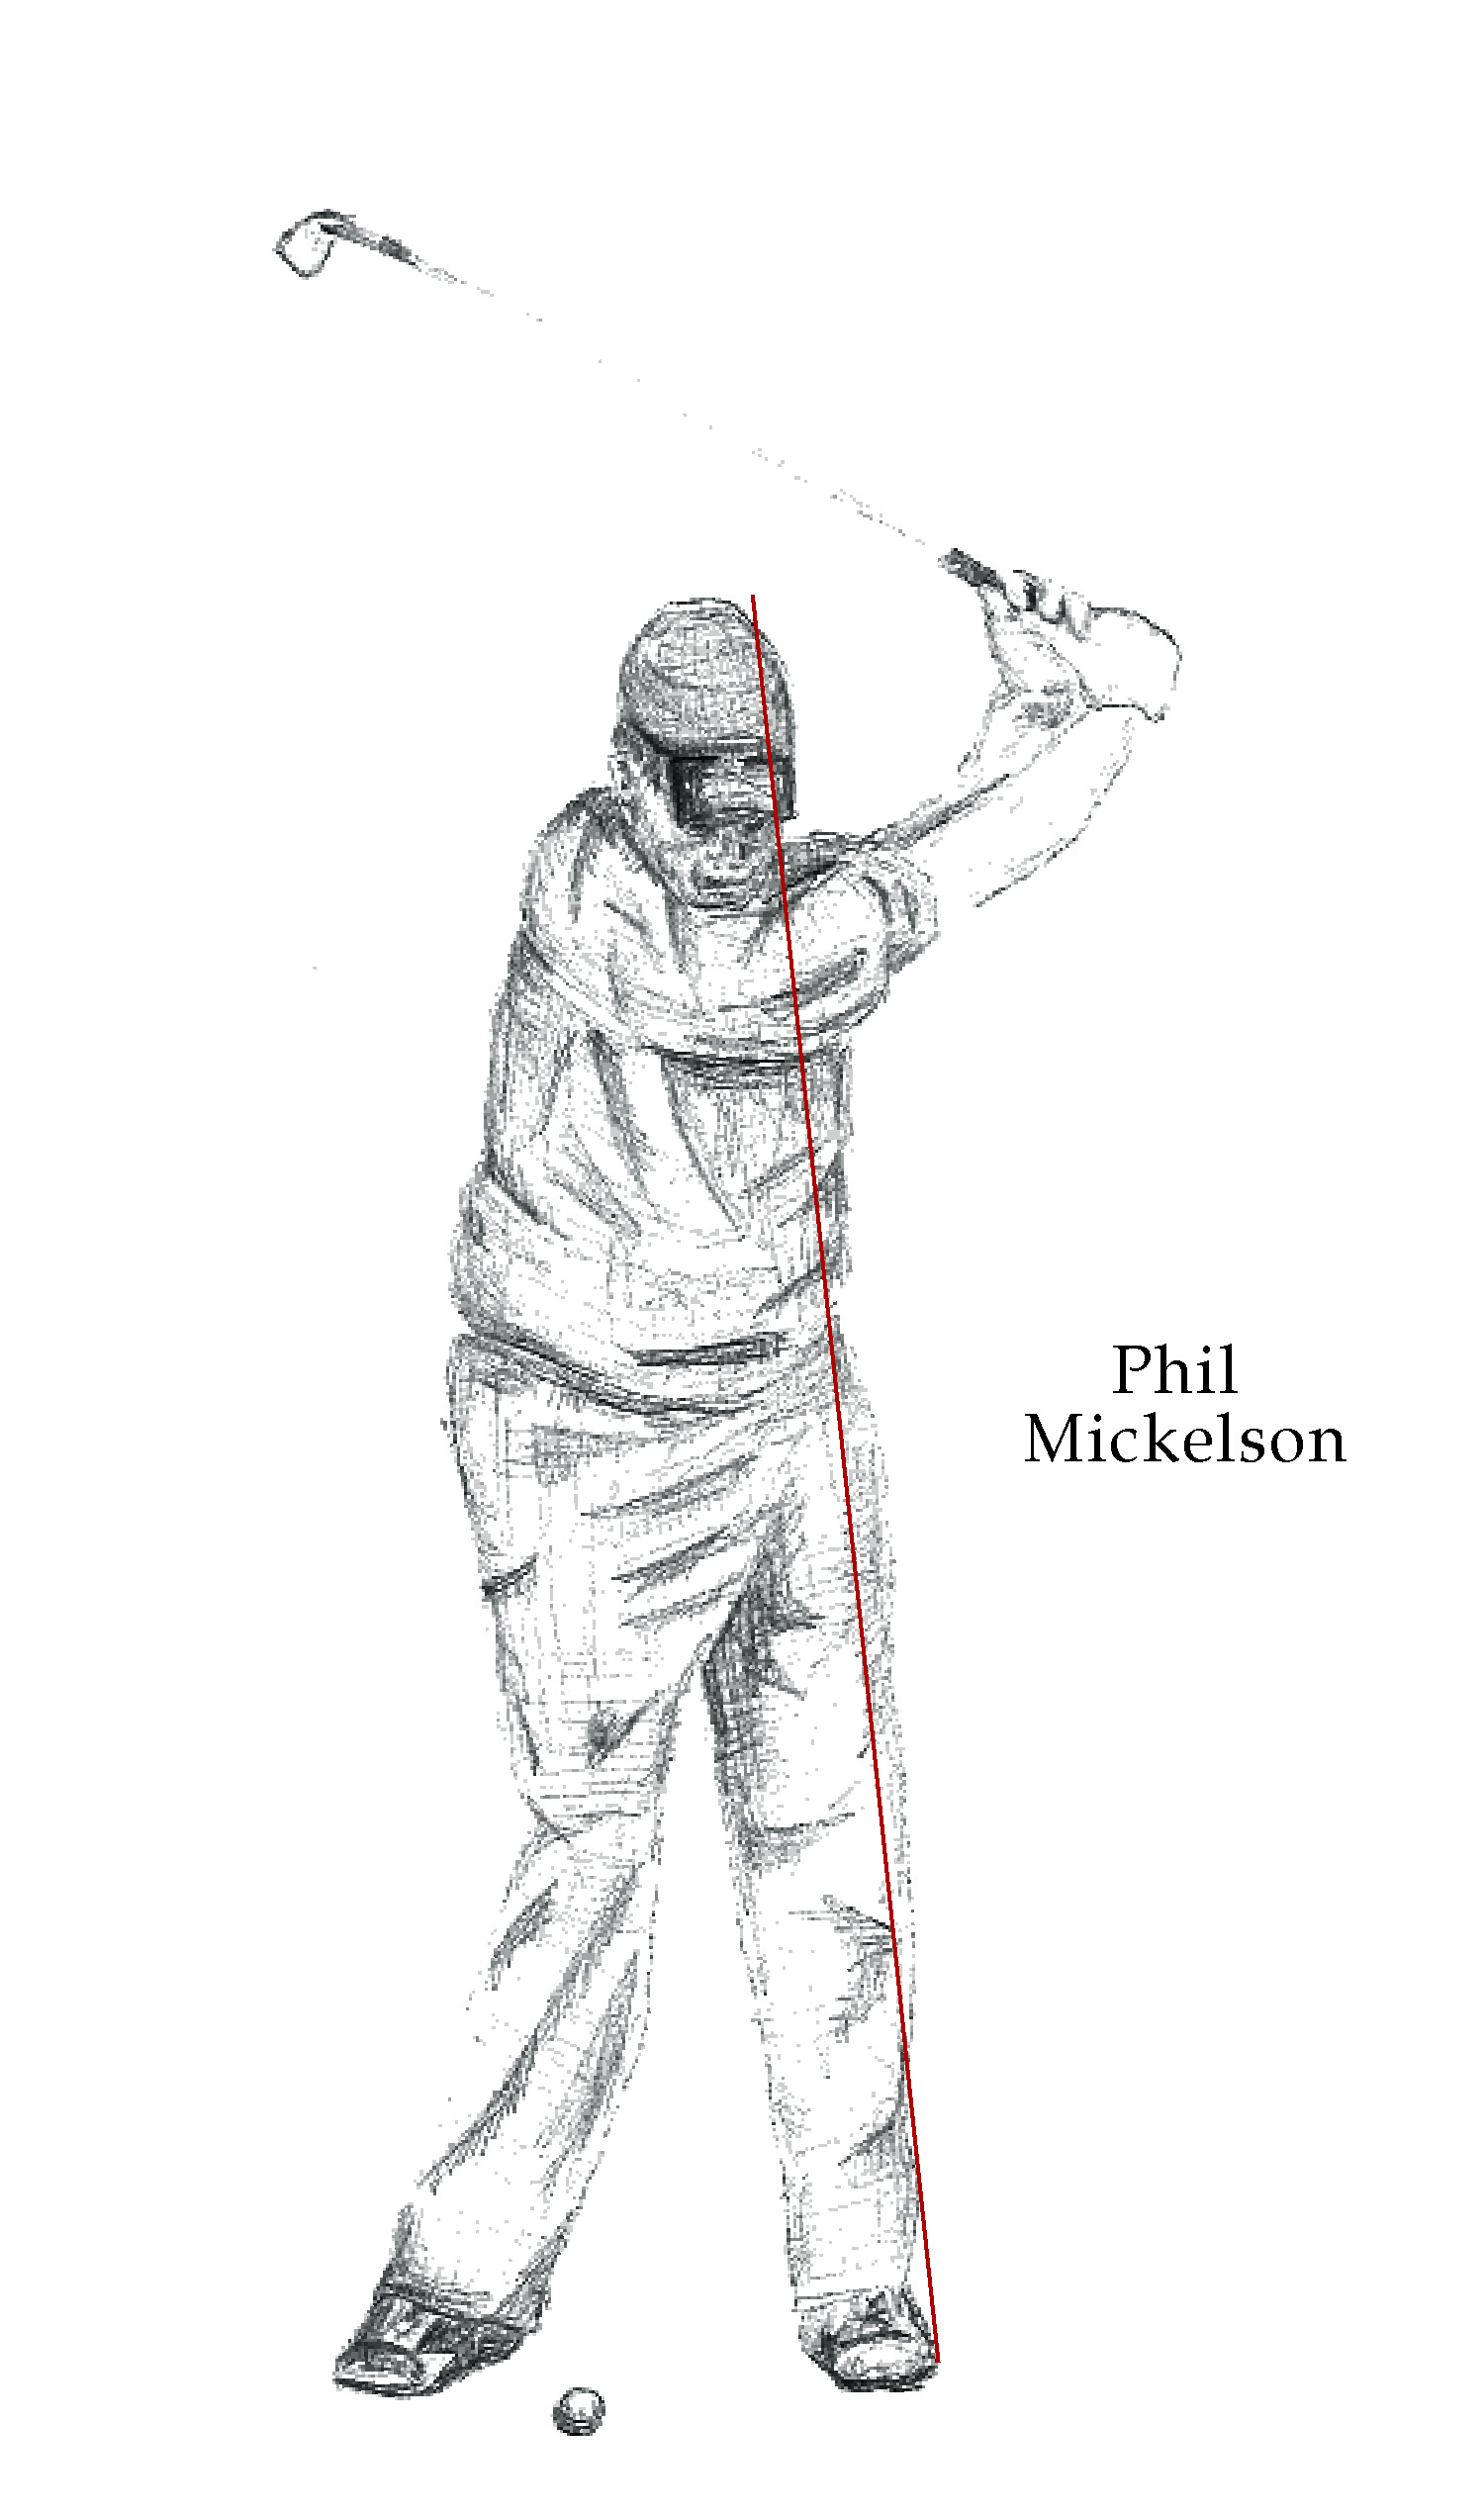 Phil Mickelson and the 84 Degree Secret